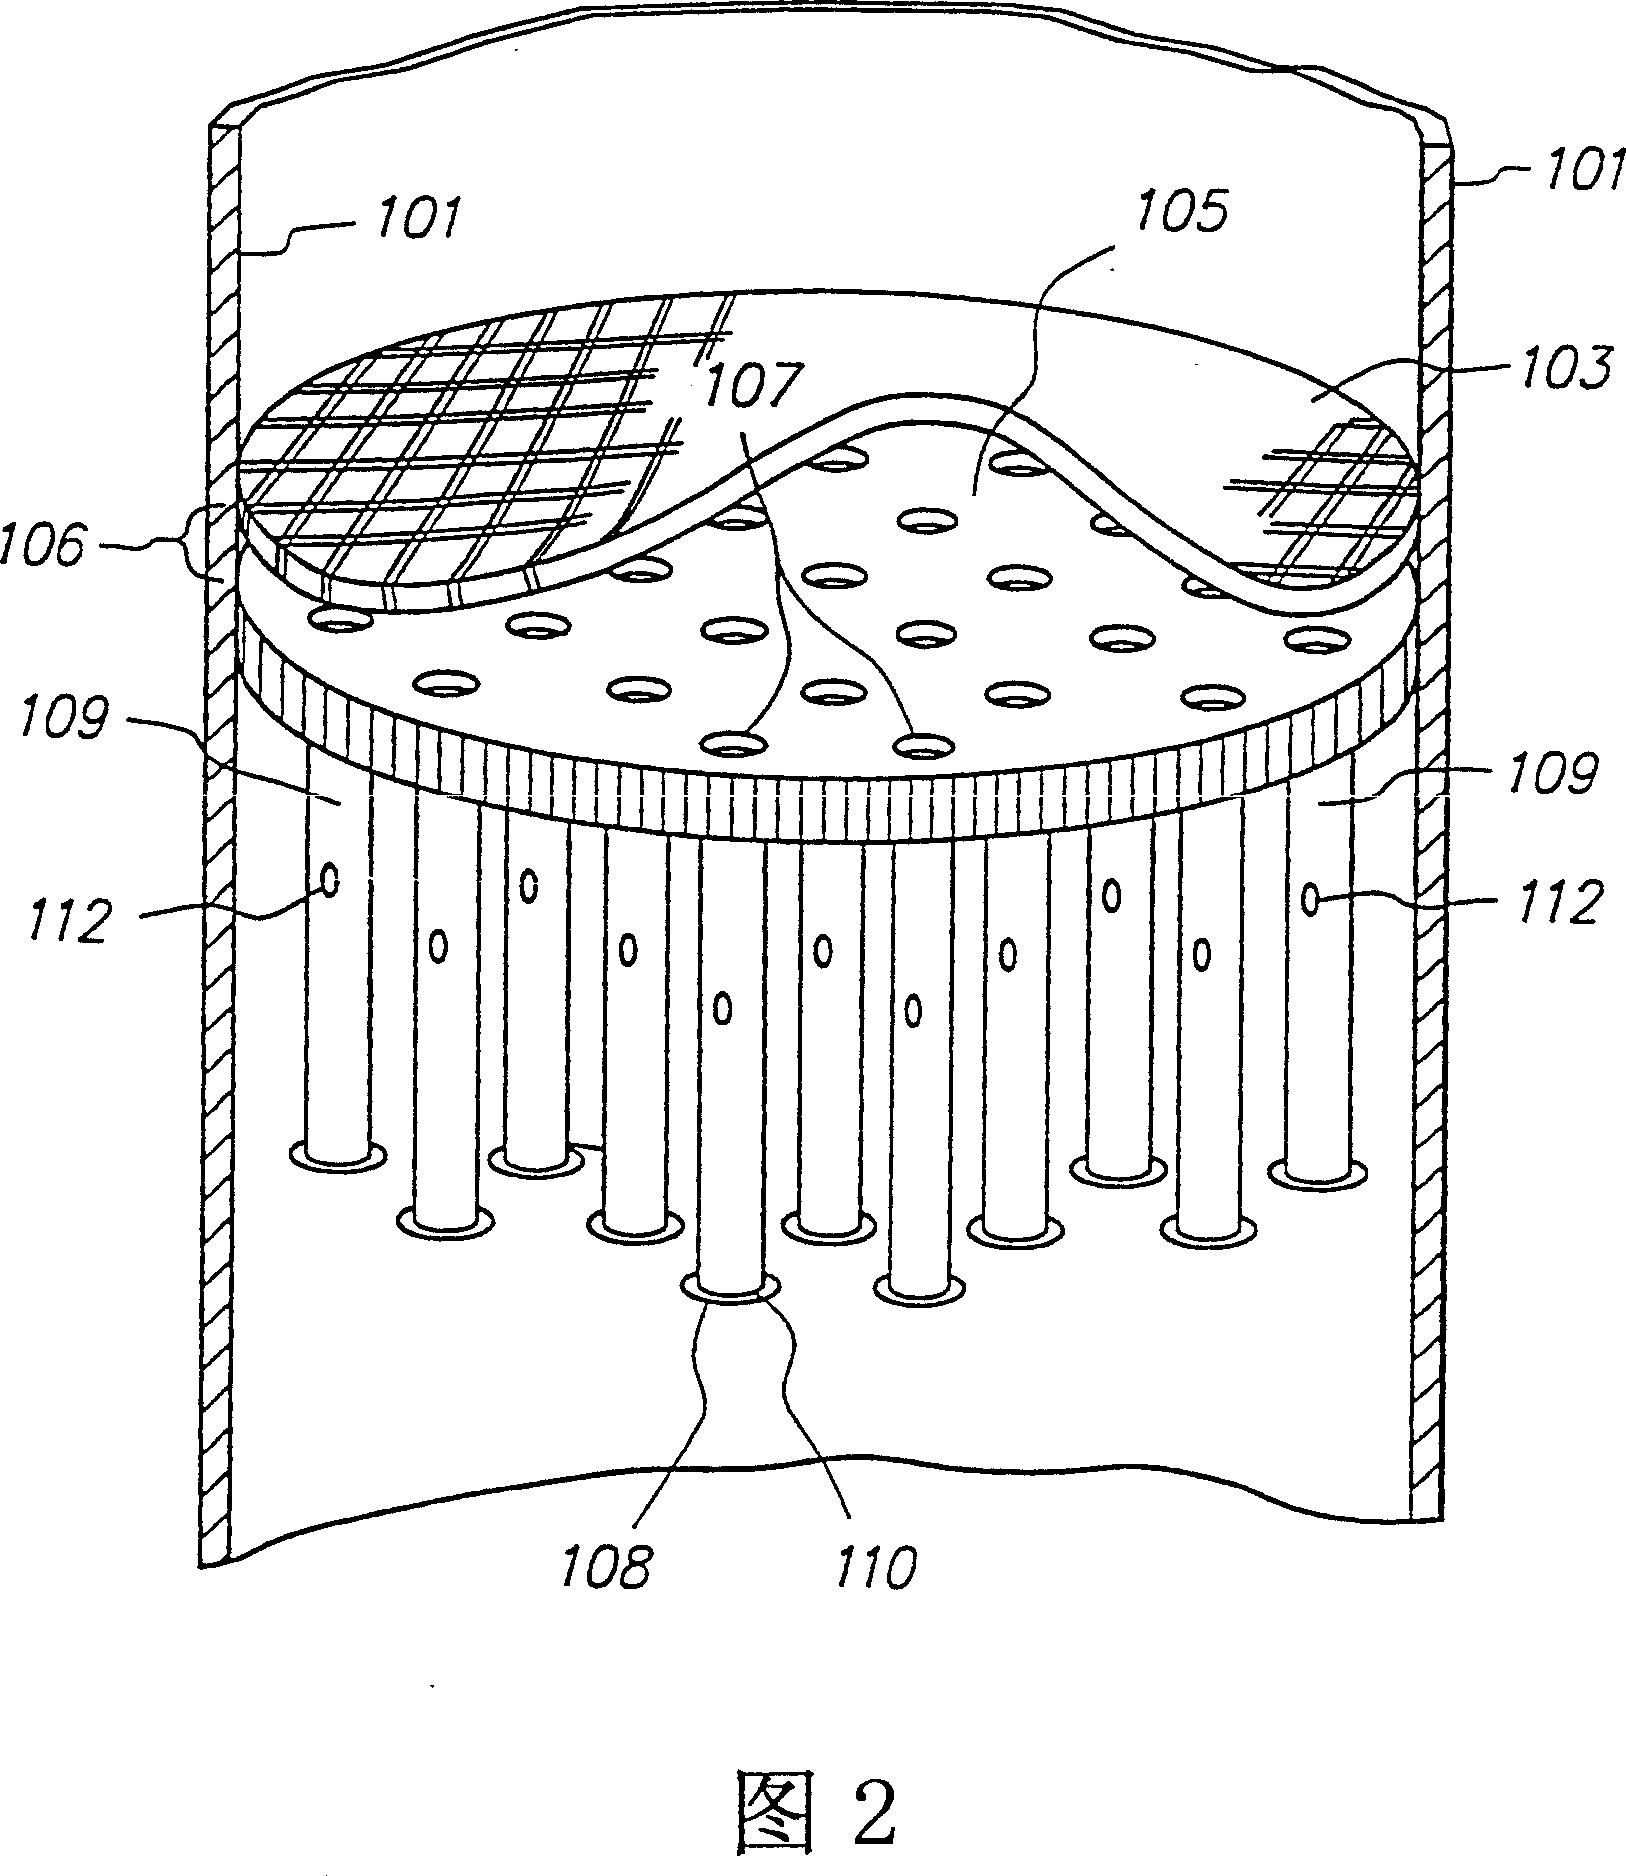 Upflow reactor system with layered catalyst bed for hydrotreating heavy feedstocks